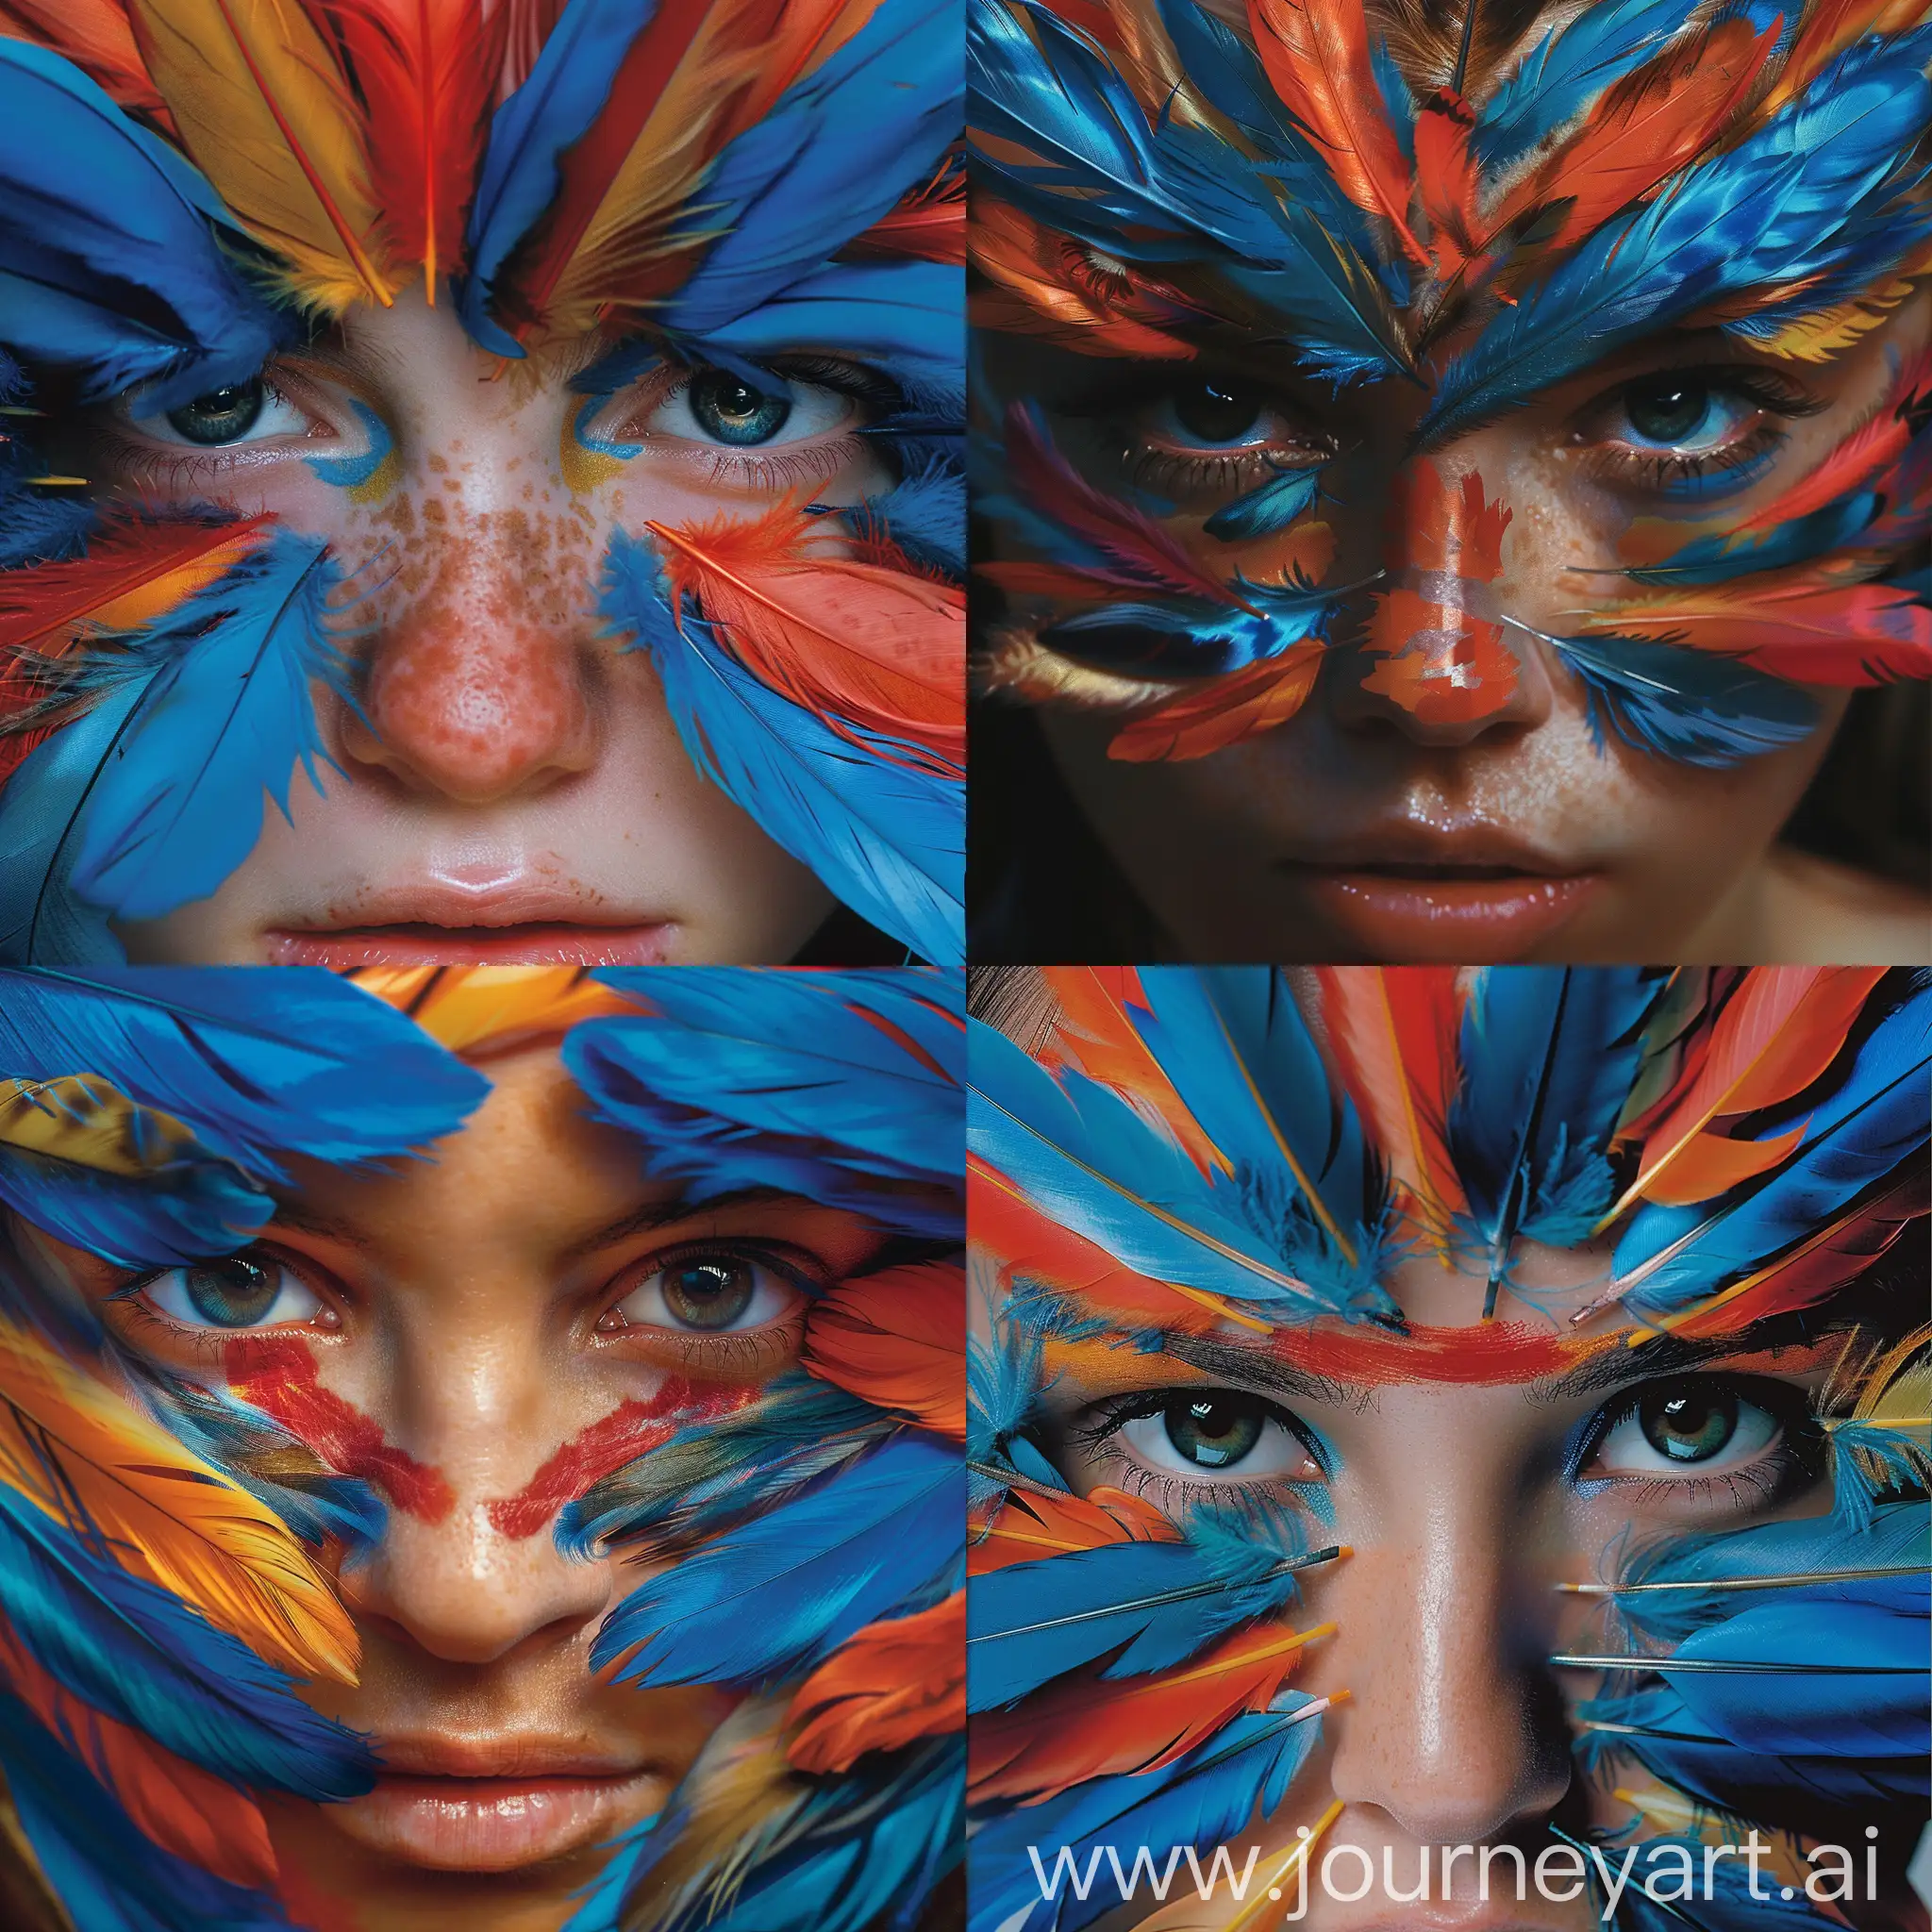 The image features a close-up of a woman's face with colorful feathers covering her cheeks and forehead. The colors of the feathers include blue, red, orange, and yellow. The woman's eyes appear to be looking directly at the viewer.